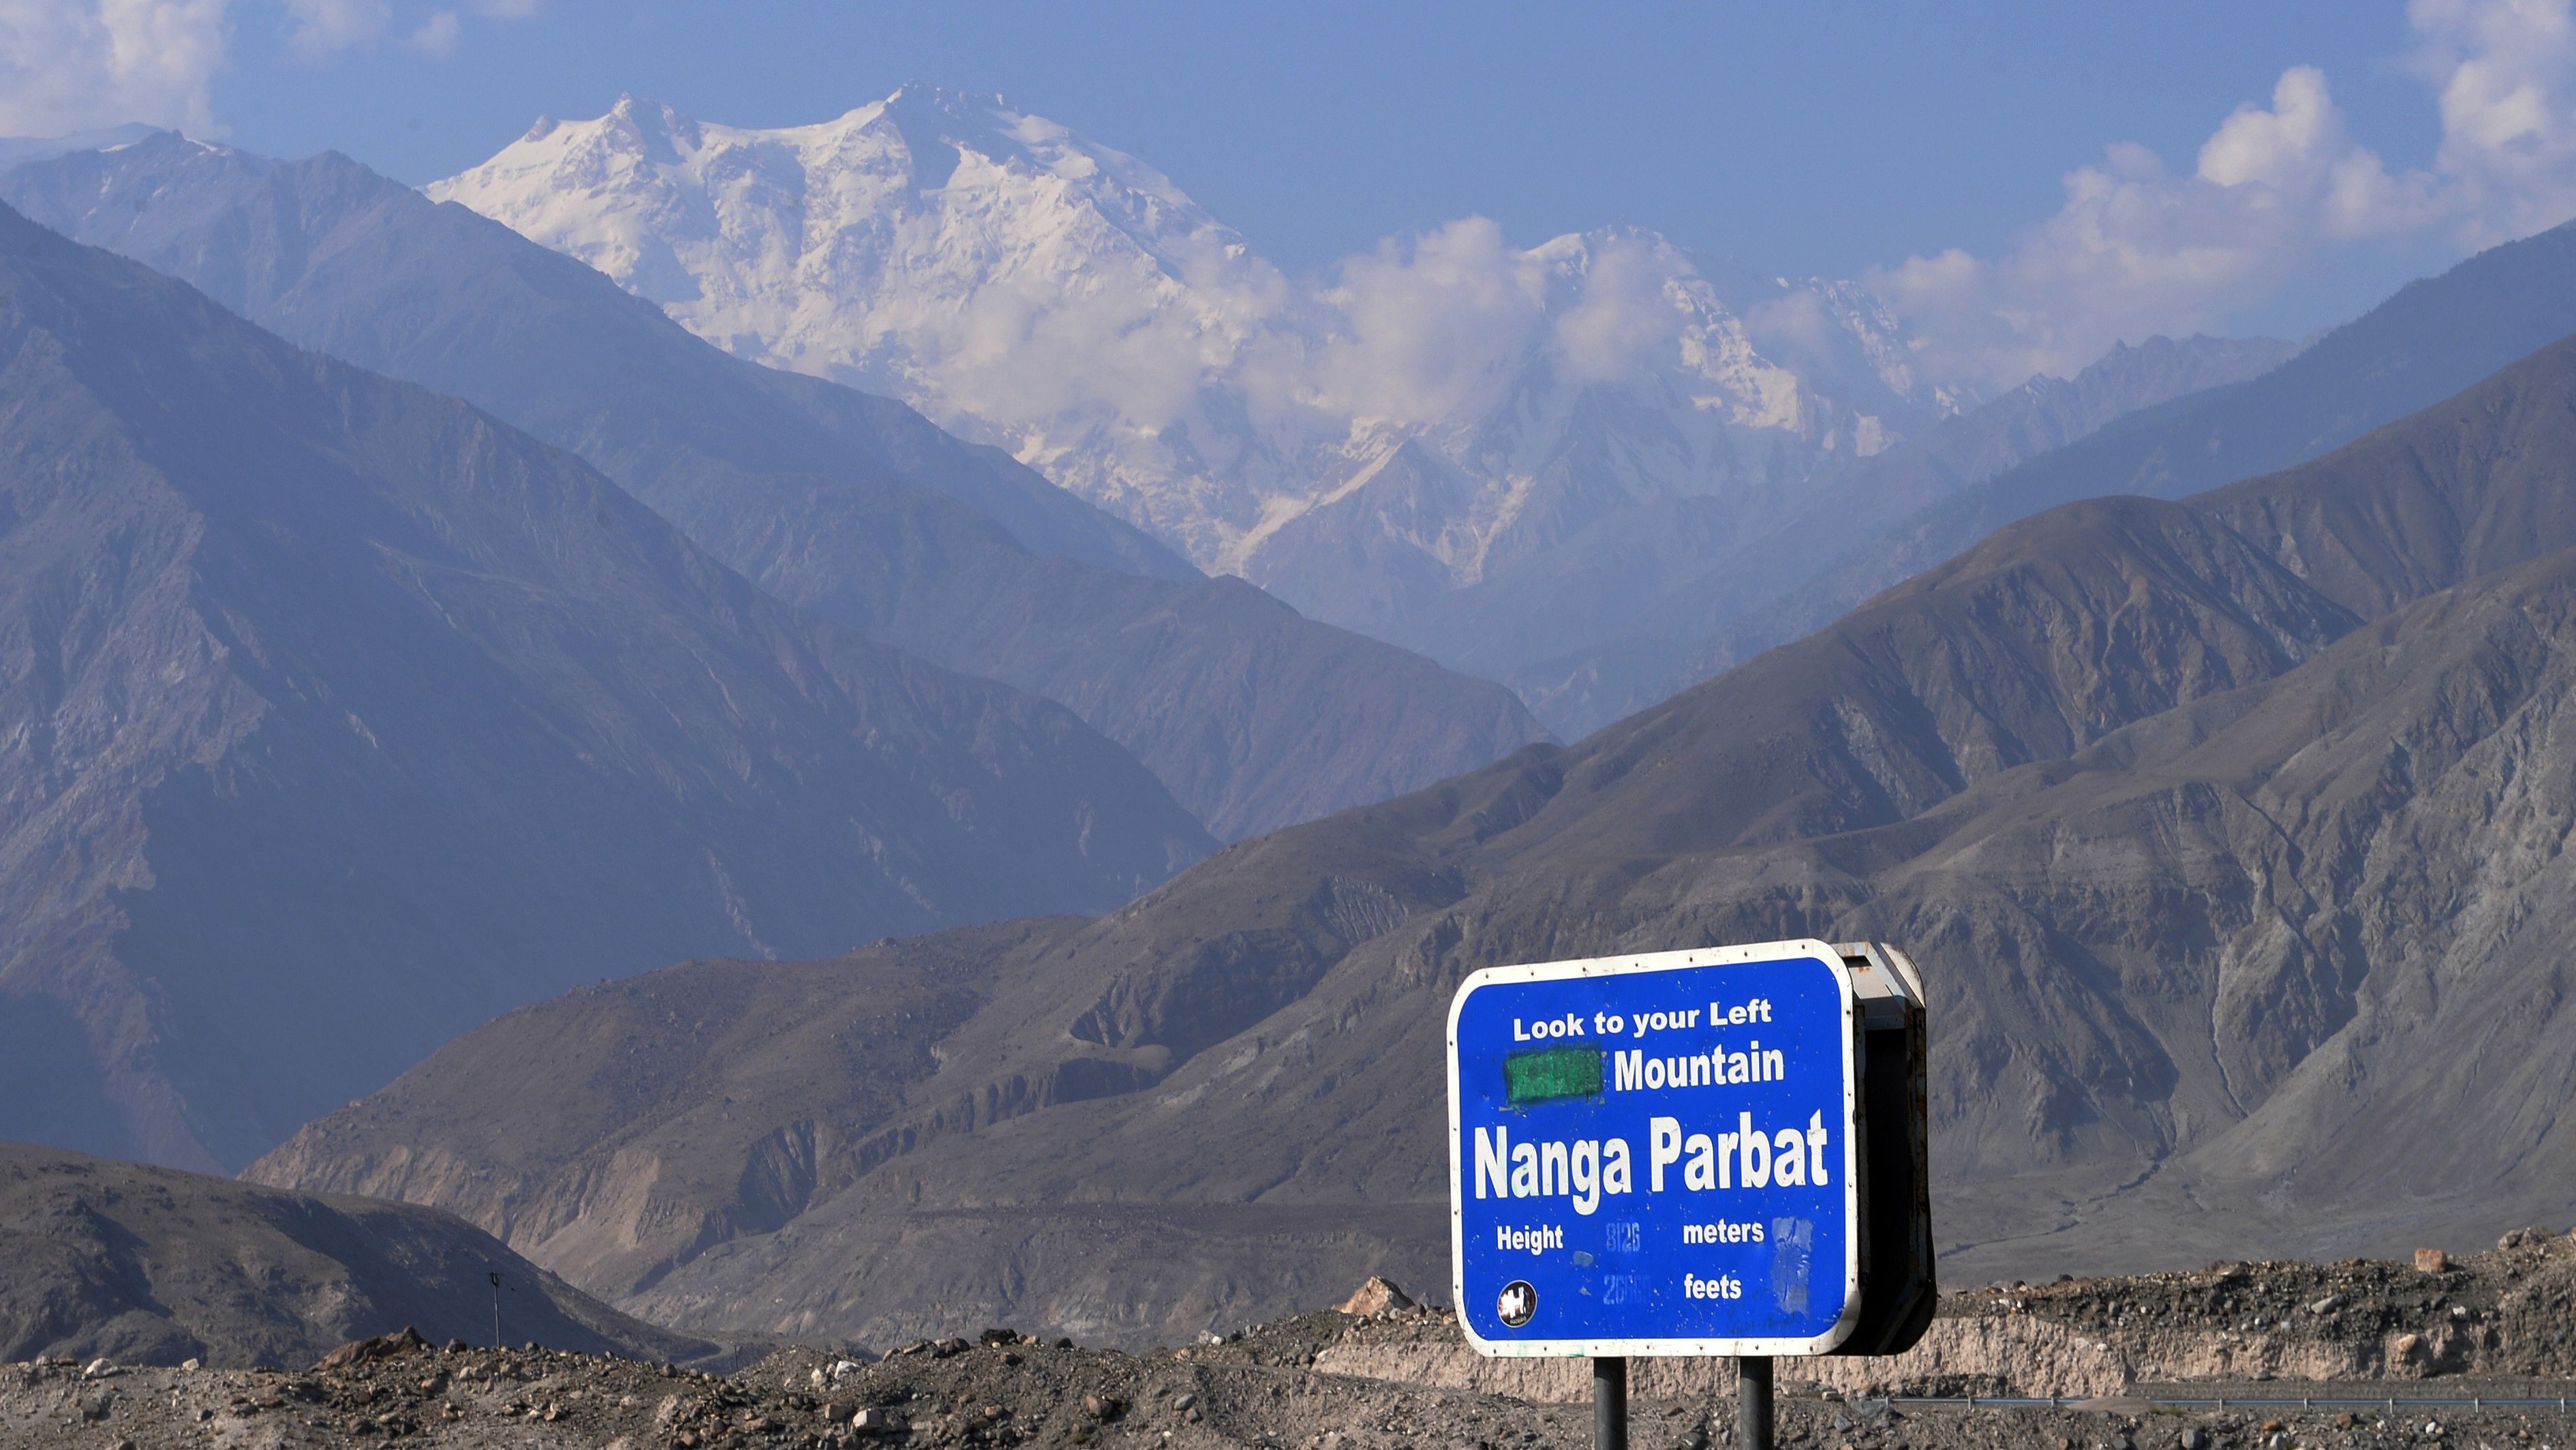 In this photograph taken on August 7, 2014 a sign points towards a view of Nanga Parbat (background), the killer mountain on Karakoram Highway in Pakistan's nothern area of Gilgit.